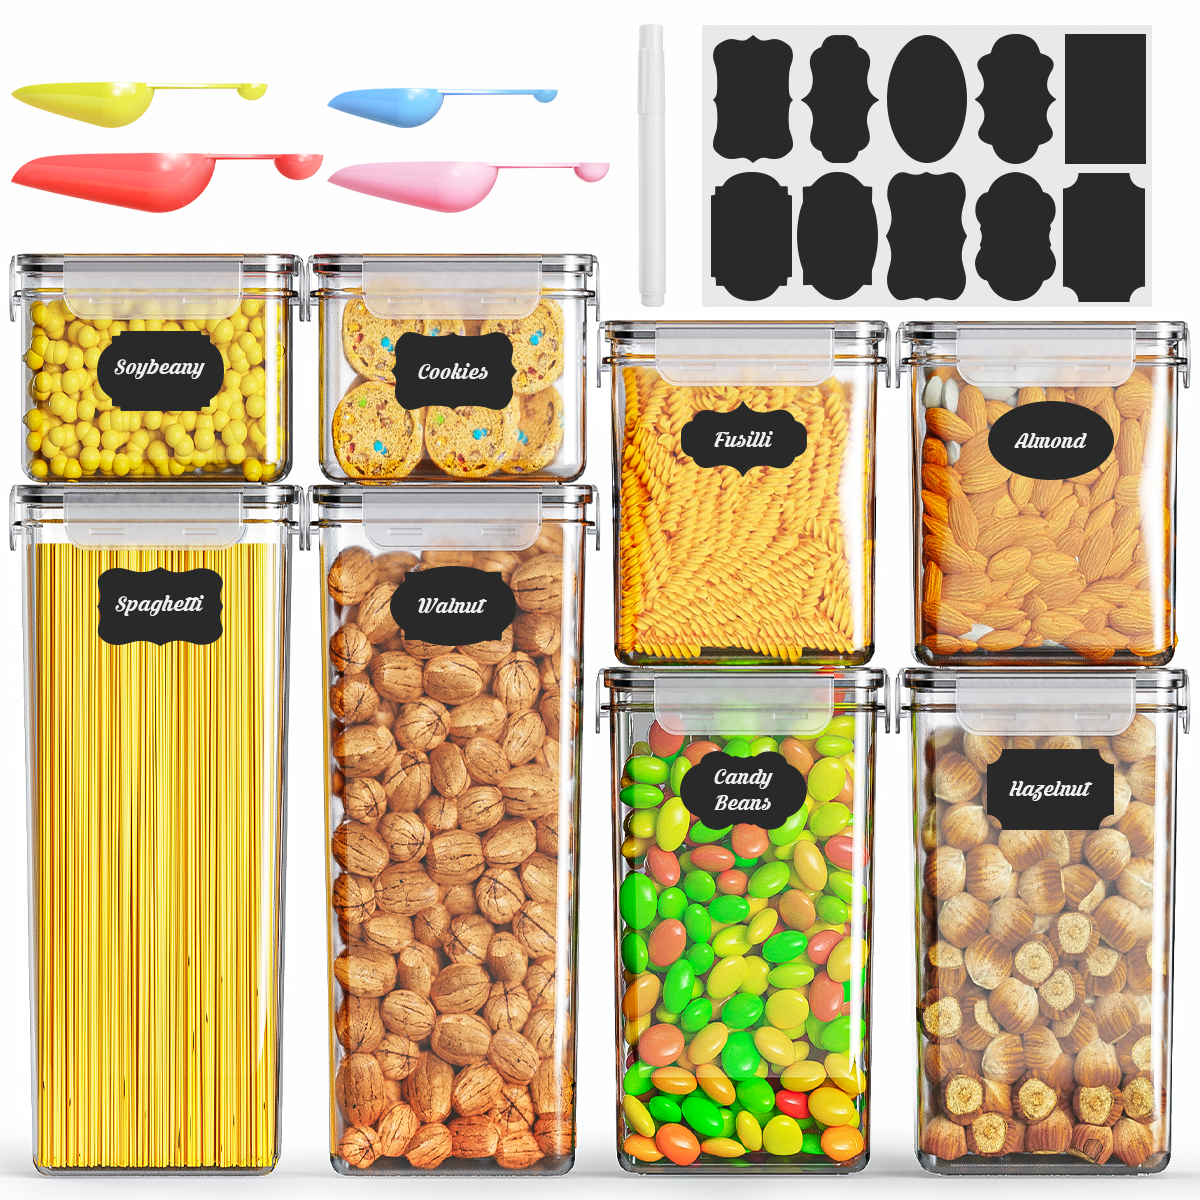 GEIKR 40 PCS Plastic Food Storage Containers with Lids Airtight